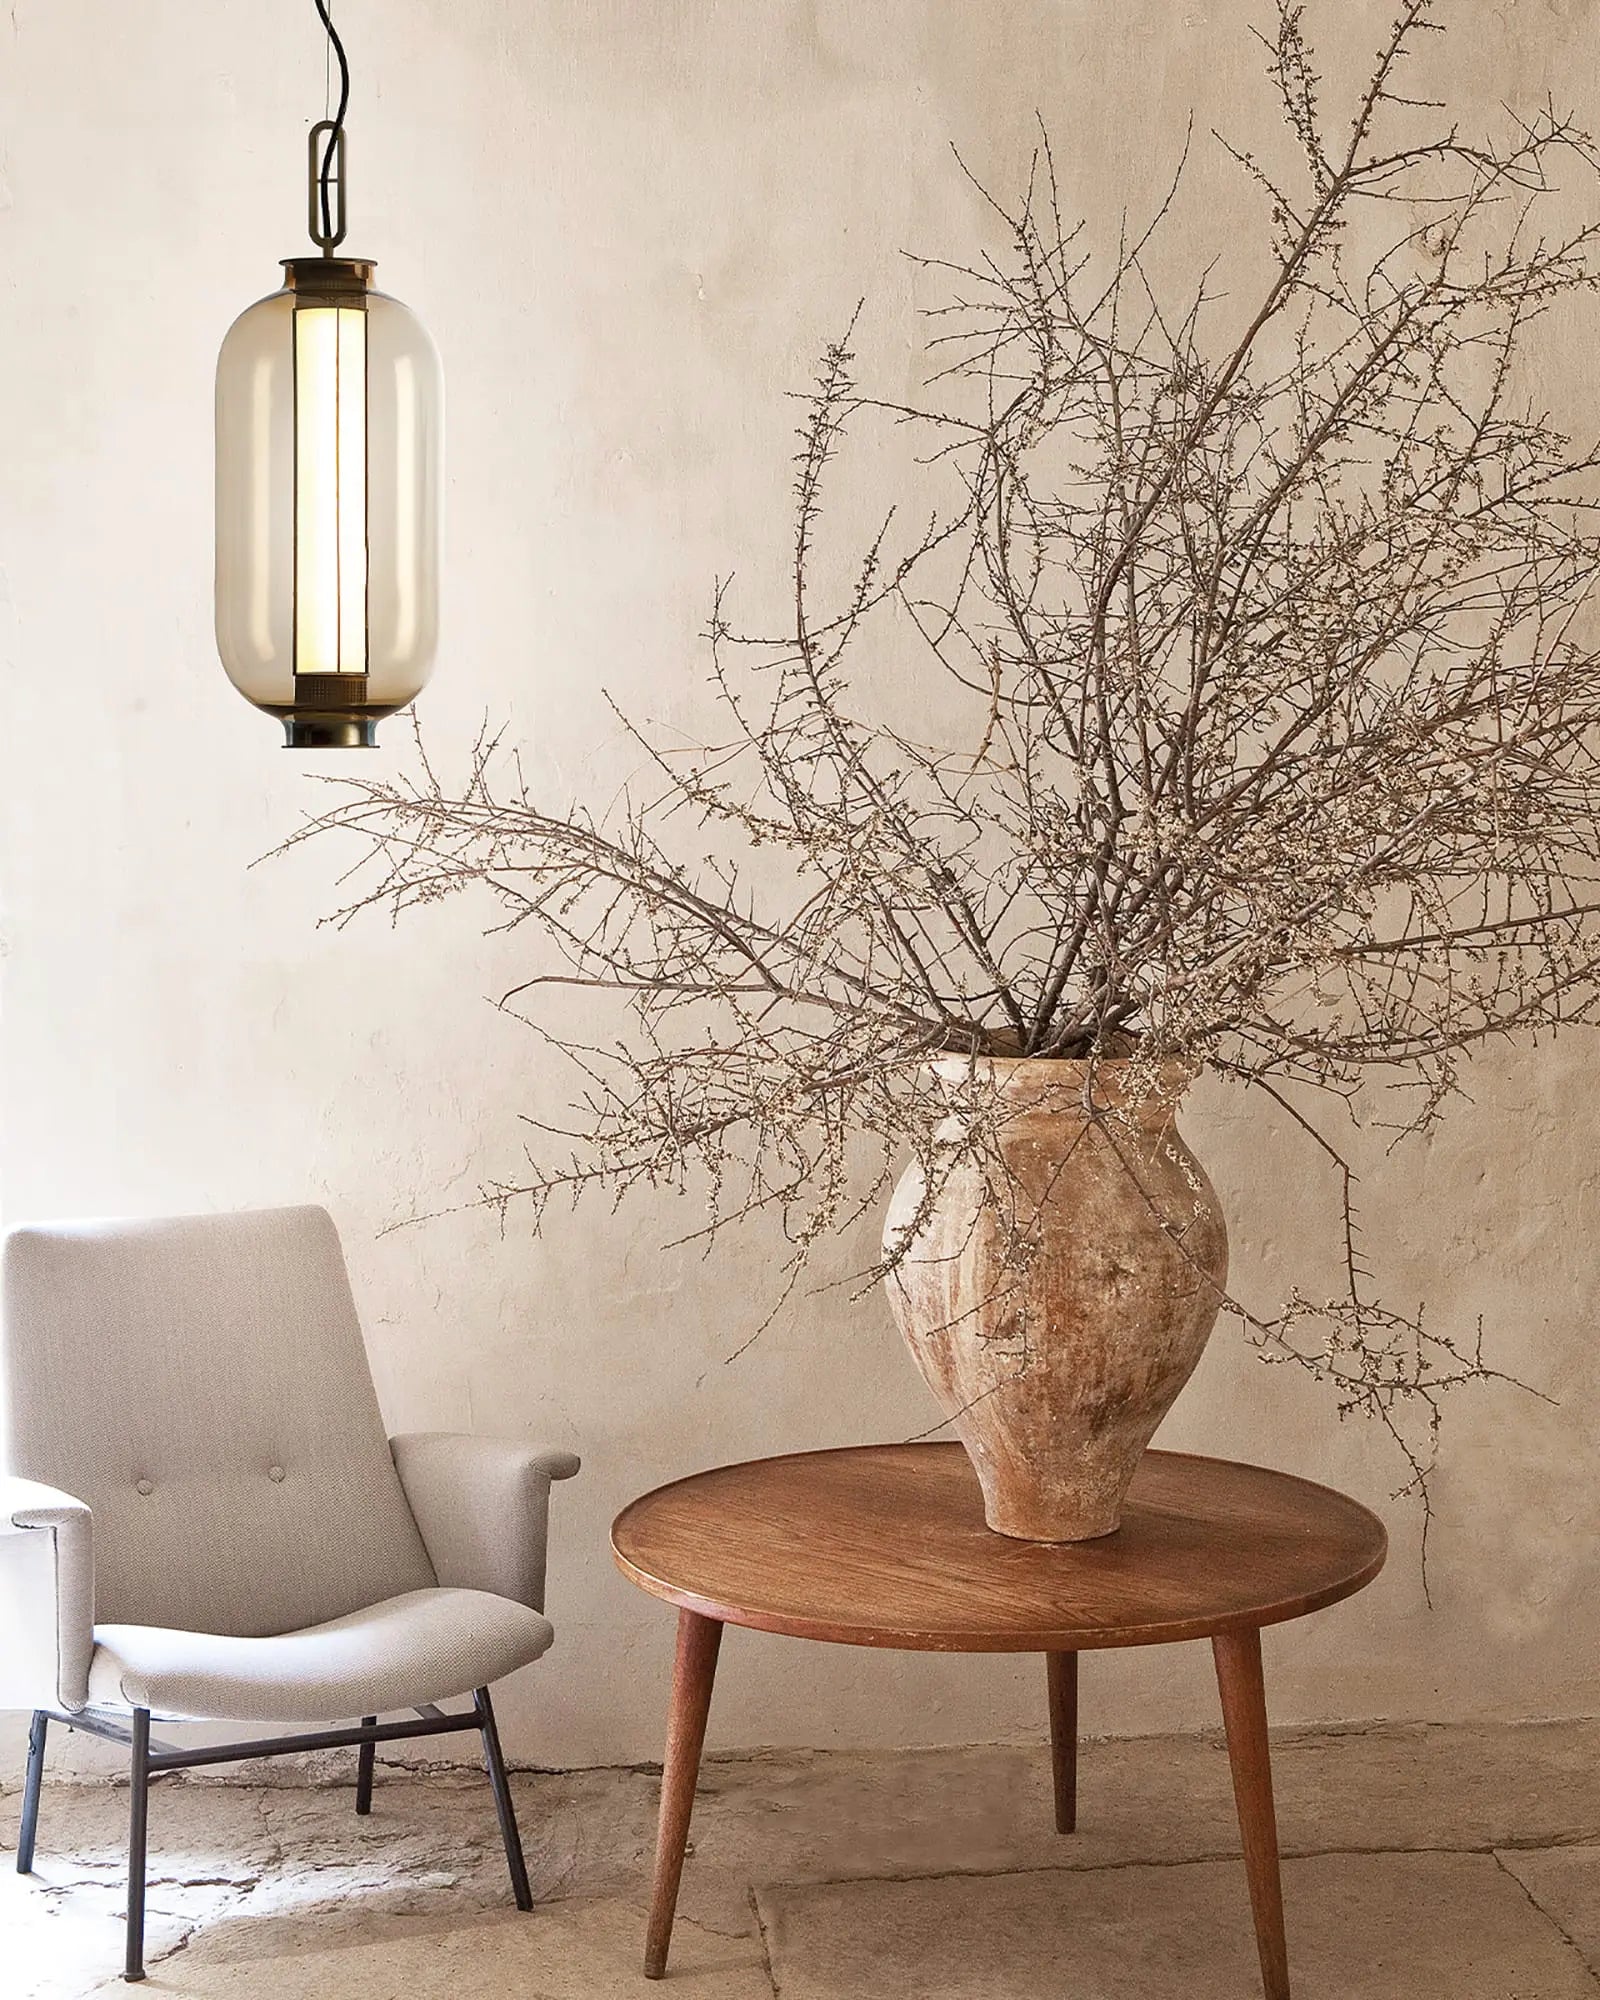 Bai Ba Ba tall bronze and blown glass Chinese lantern style pendant light on a chair in a lounge area